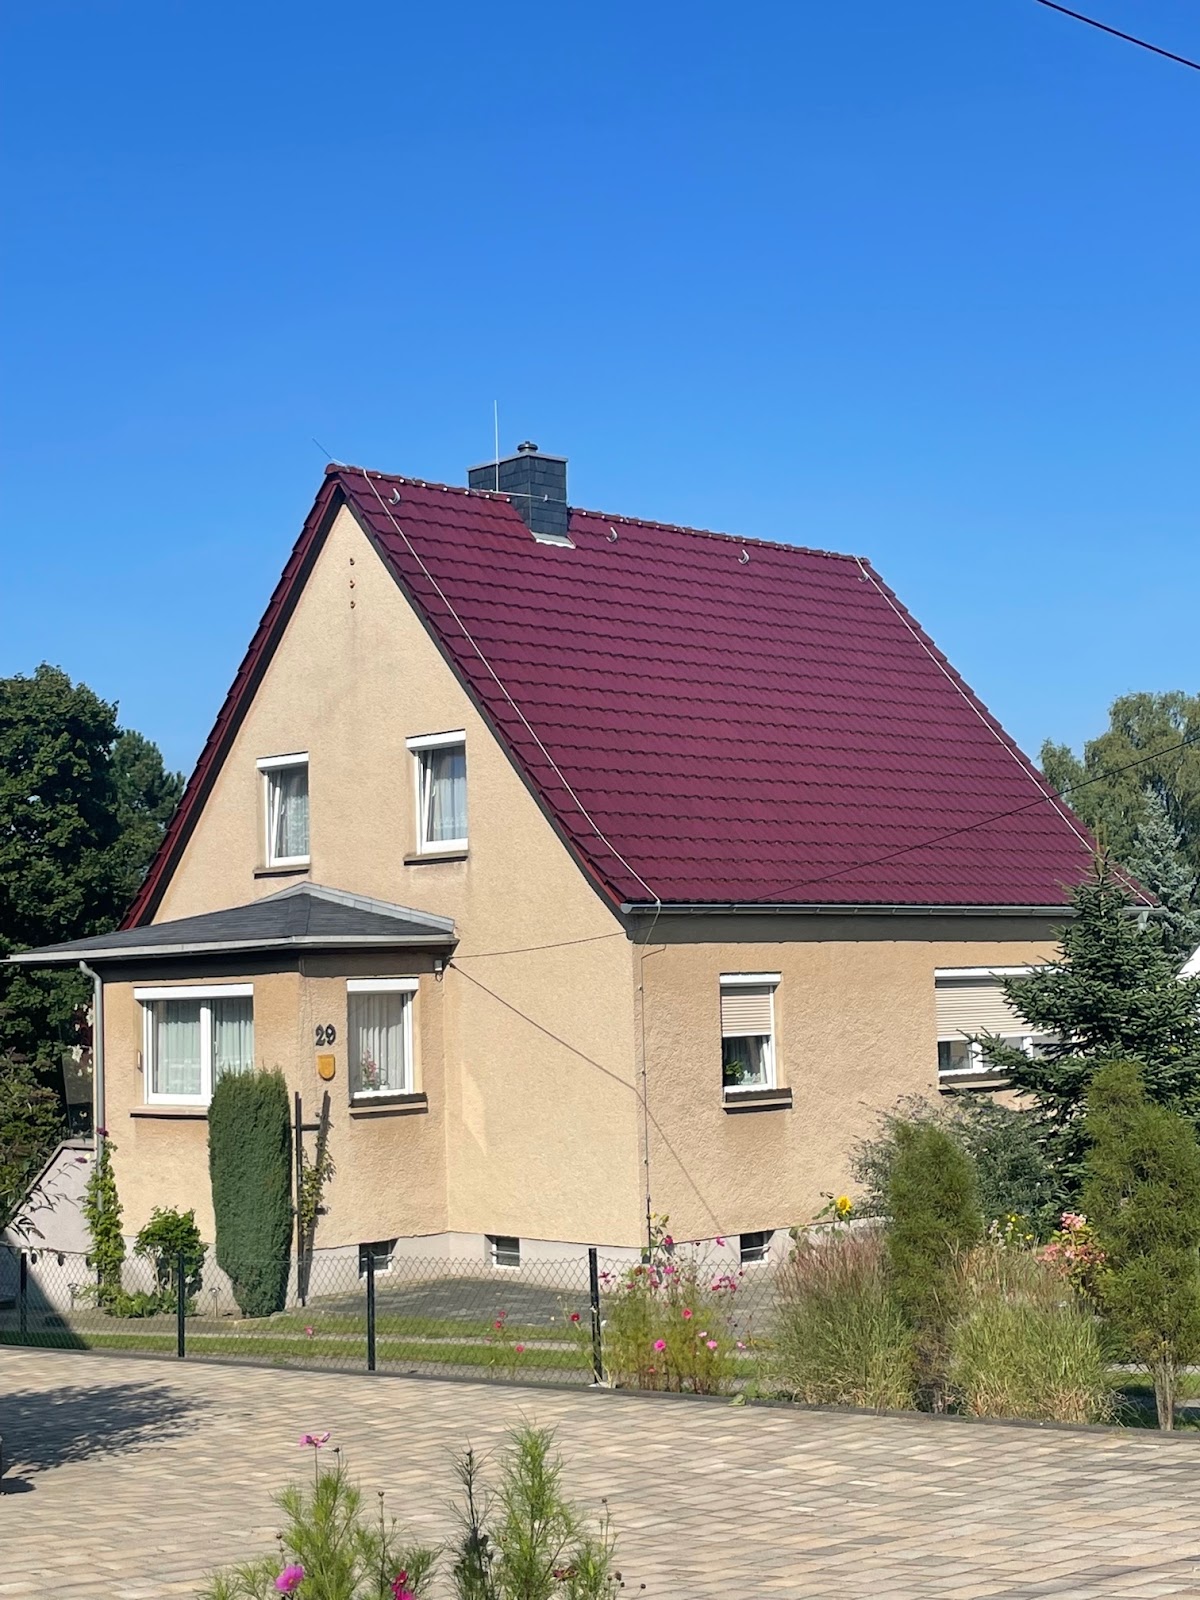 home in germany with red roofing